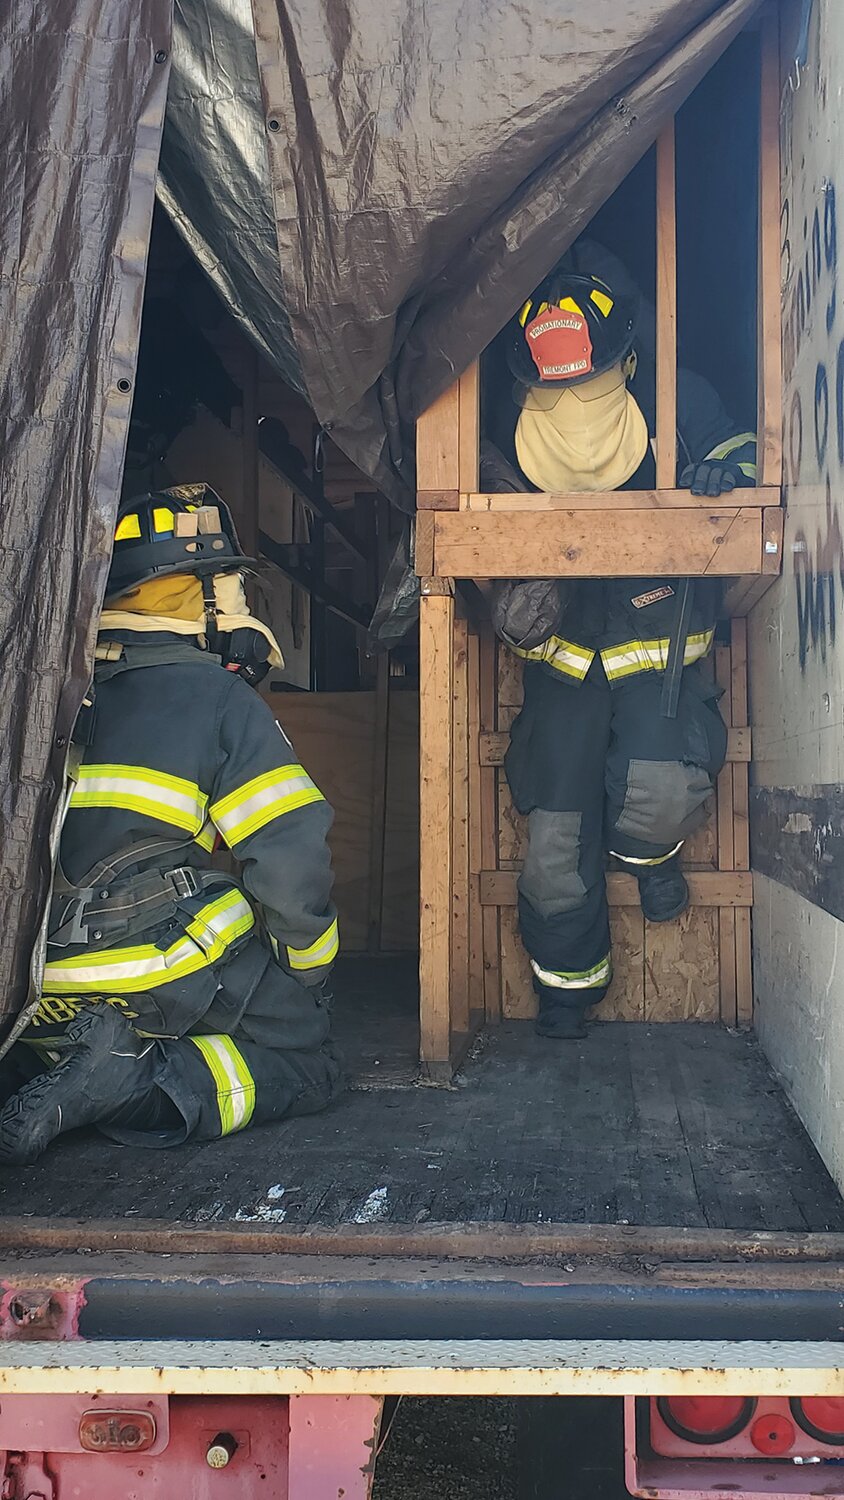 The Amboy Fire District offers free training to its members. Different training sessions are held at the Amboy fire station and the training grounds across the street.